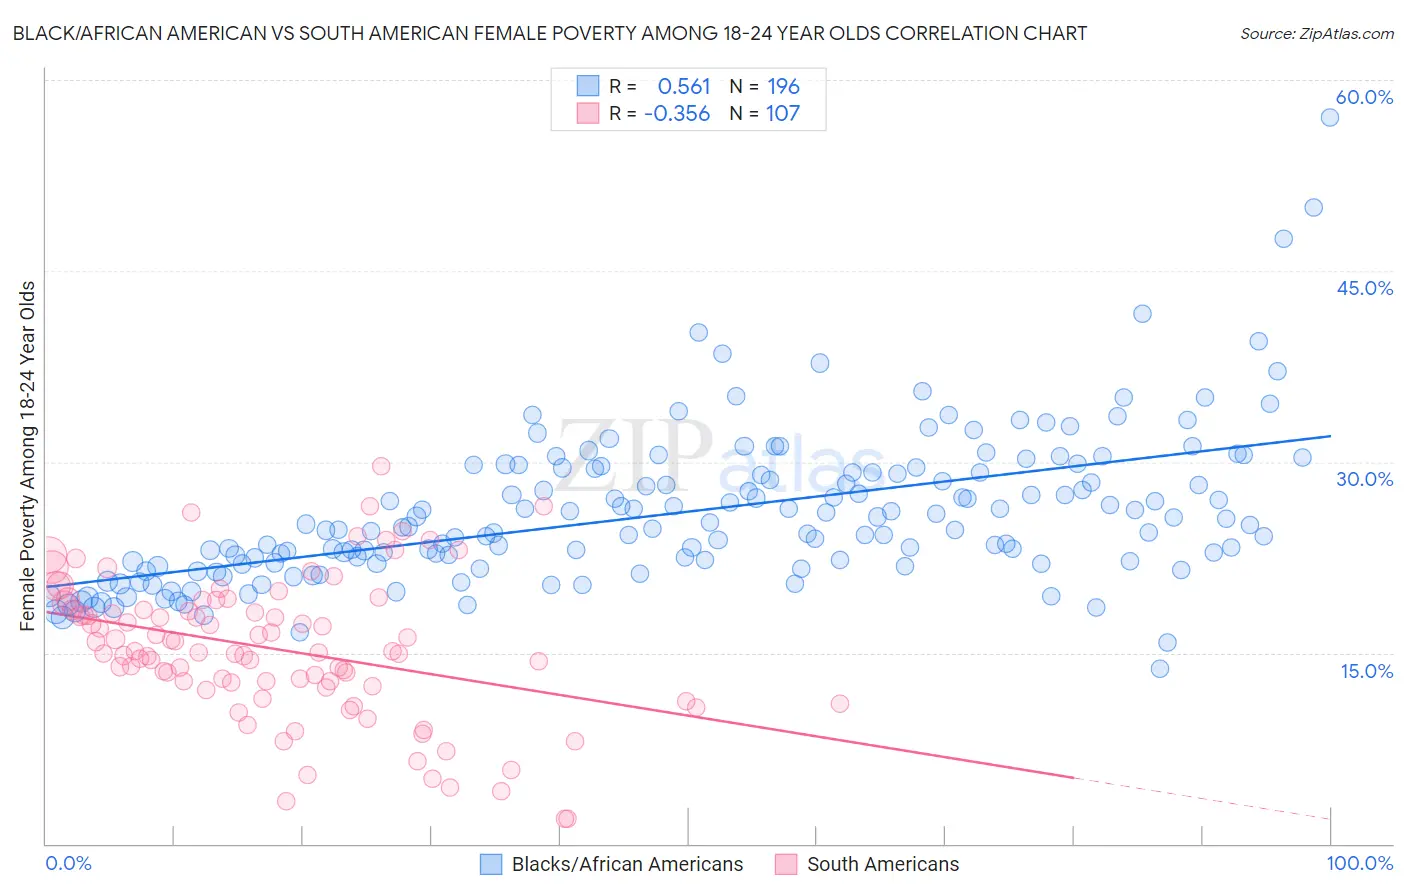 Black/African American vs South American Female Poverty Among 18-24 Year Olds